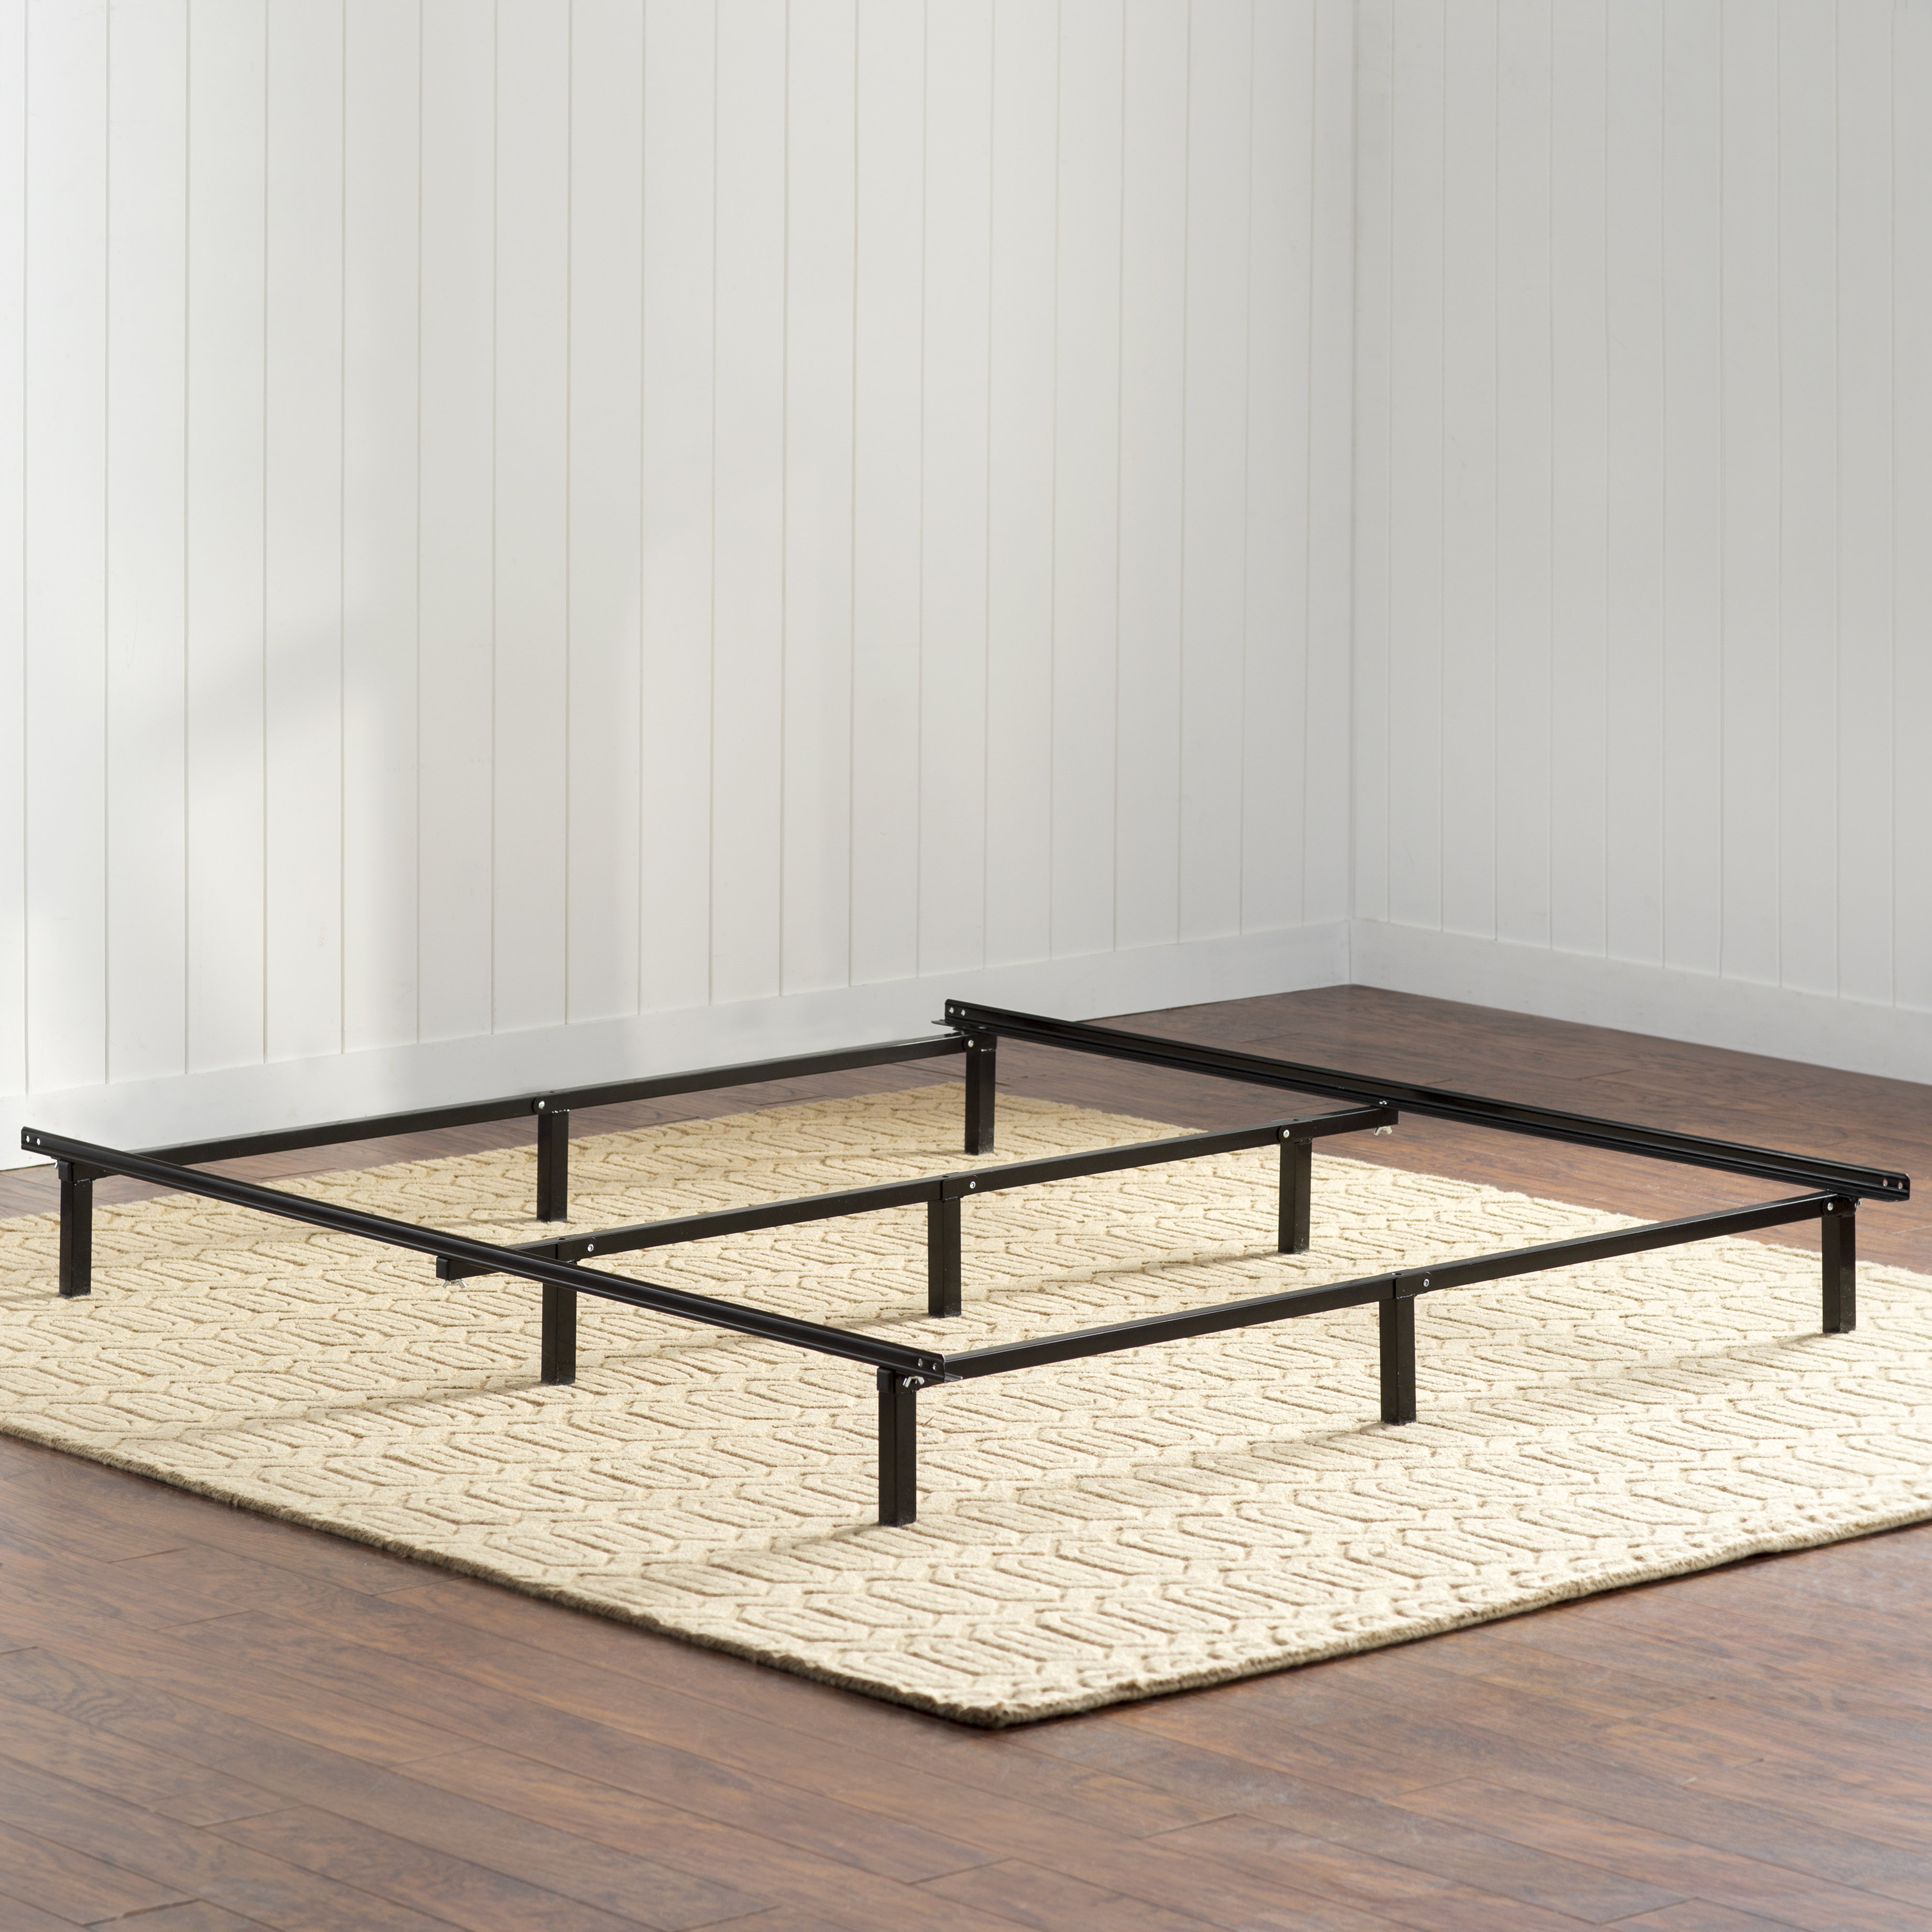 What Is a Bed Frame? Reasons to Have a
  Bed Frame